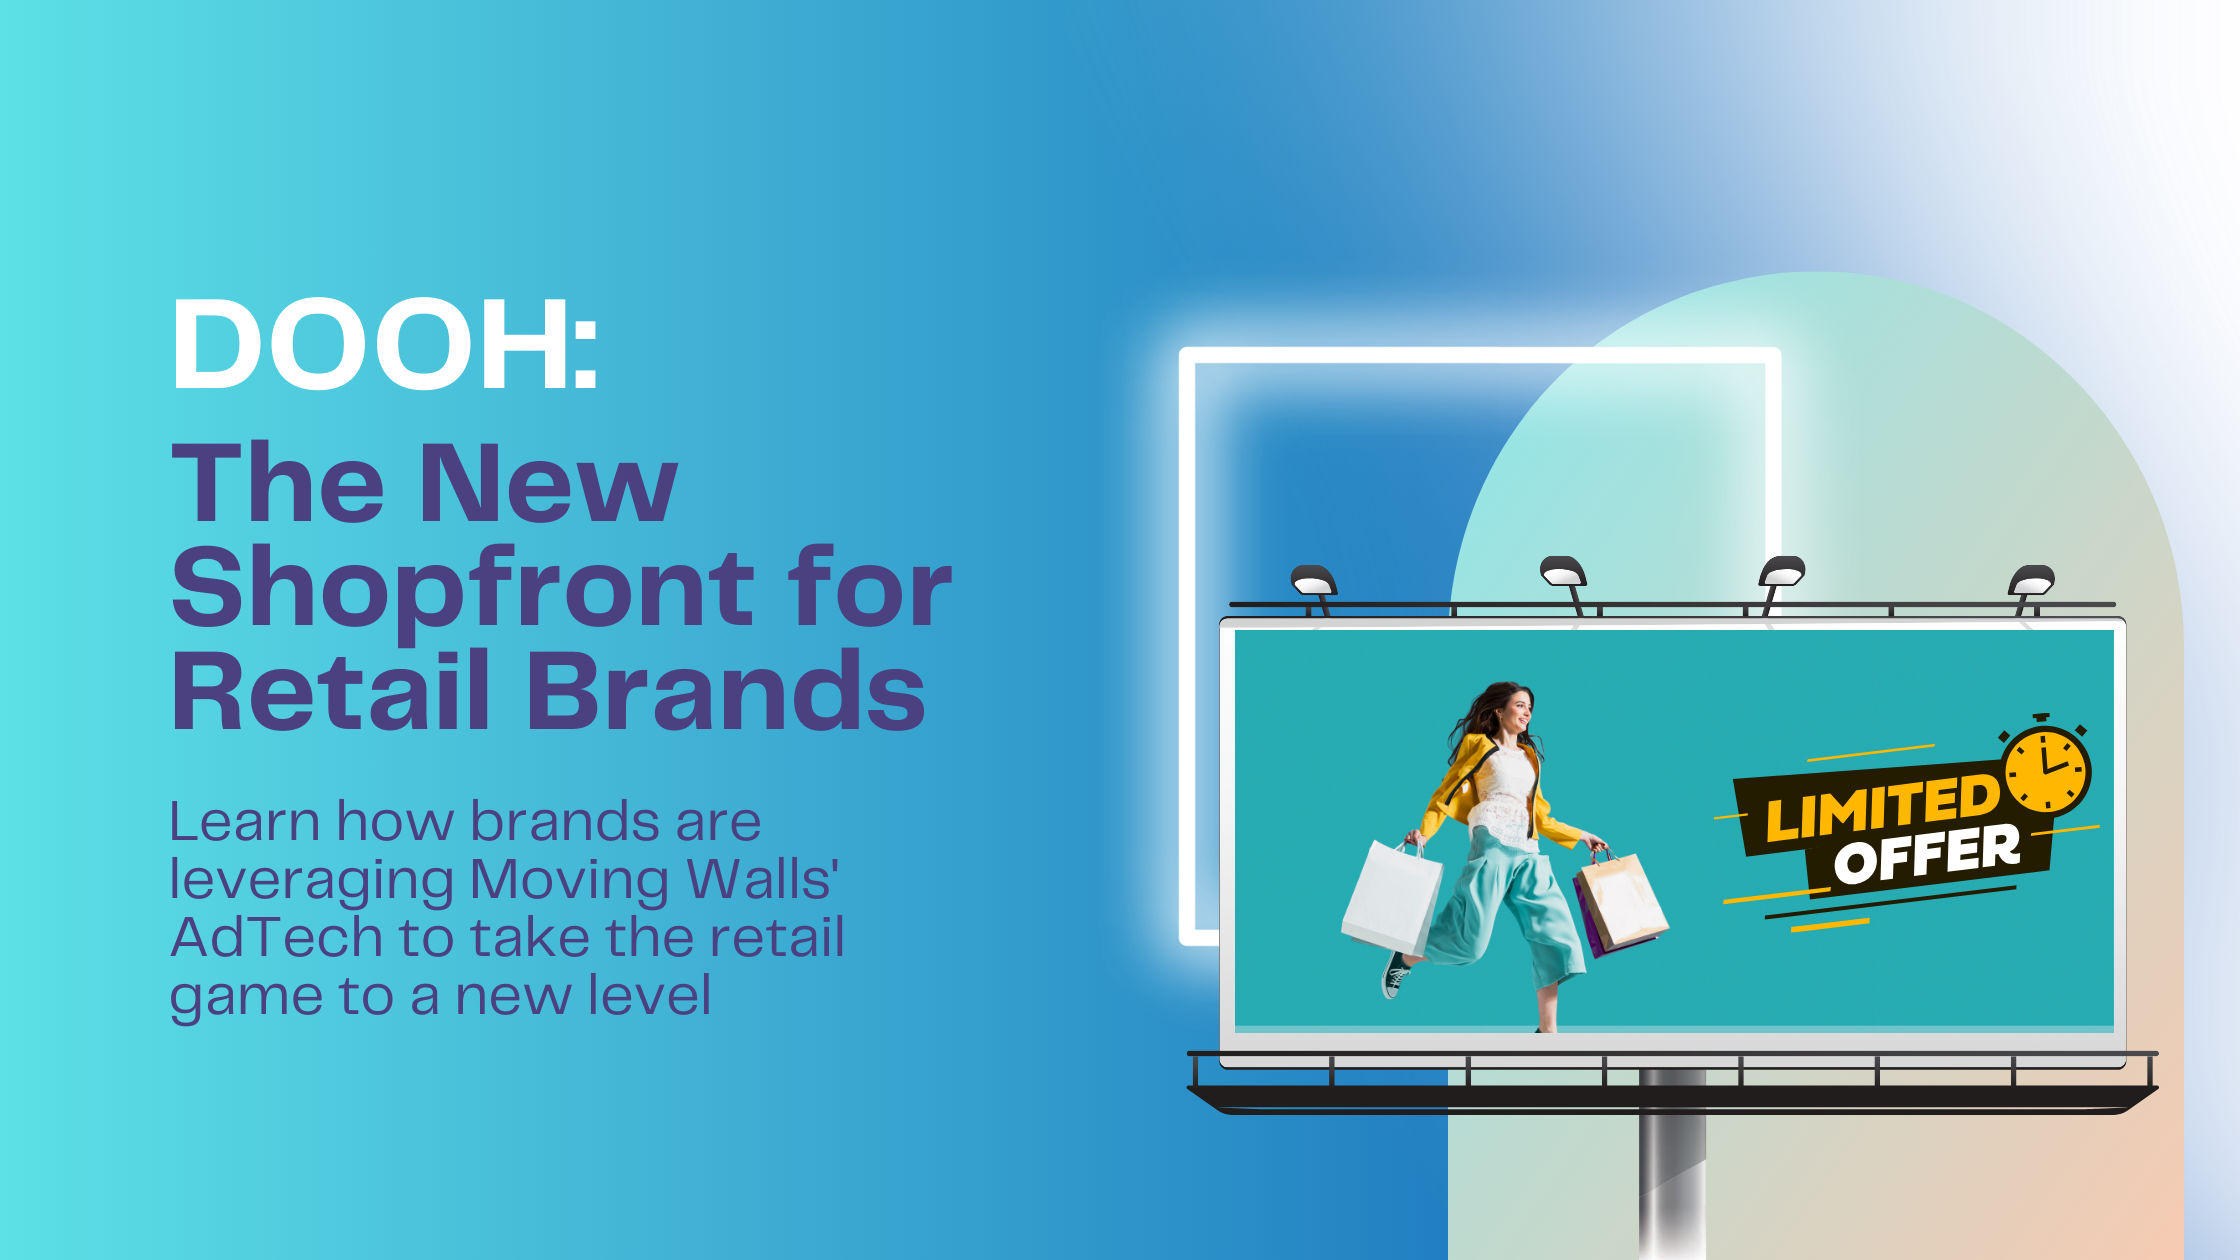 DOOH: The New Shopfront for Retail Brands